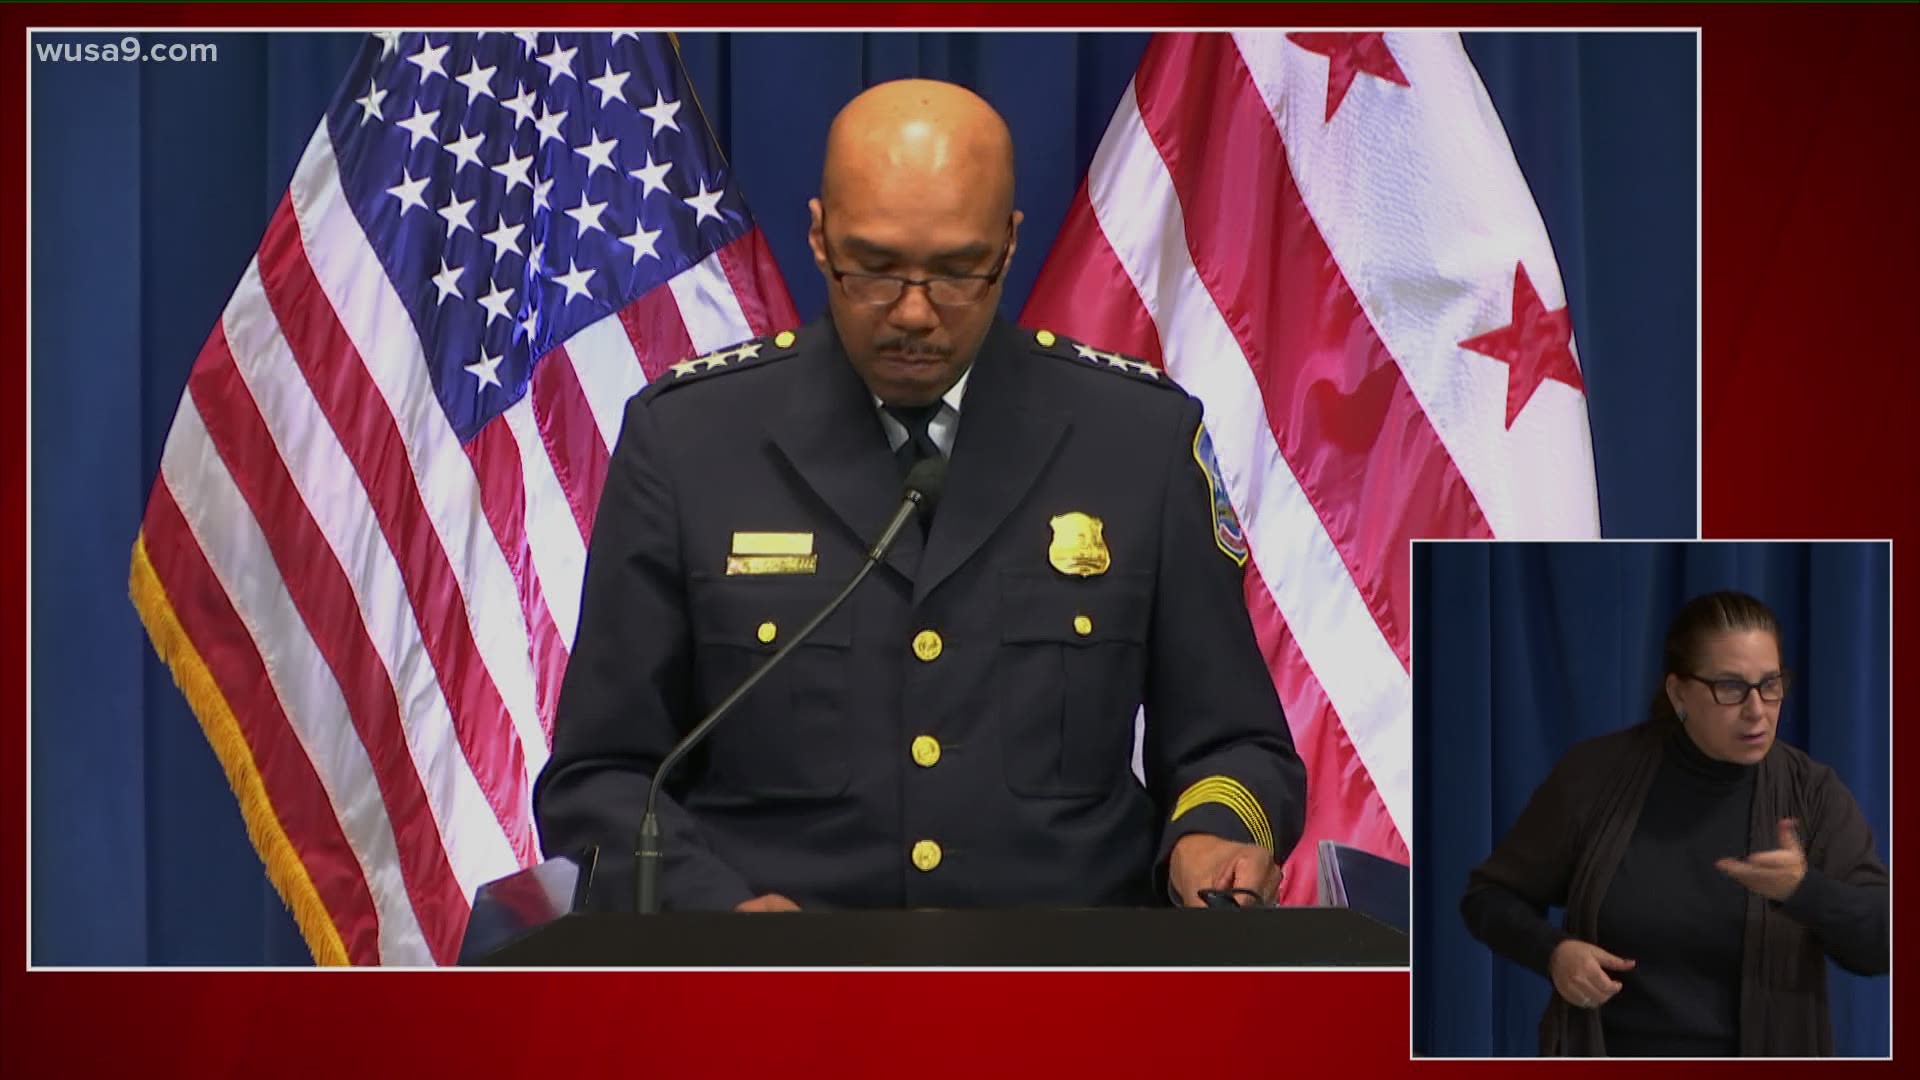 D.C. Mayor Muriel Bowser officially nominated 31-year police veteran, Robert J. Contee, as the city's new police chief on Tuesday during a news conference.